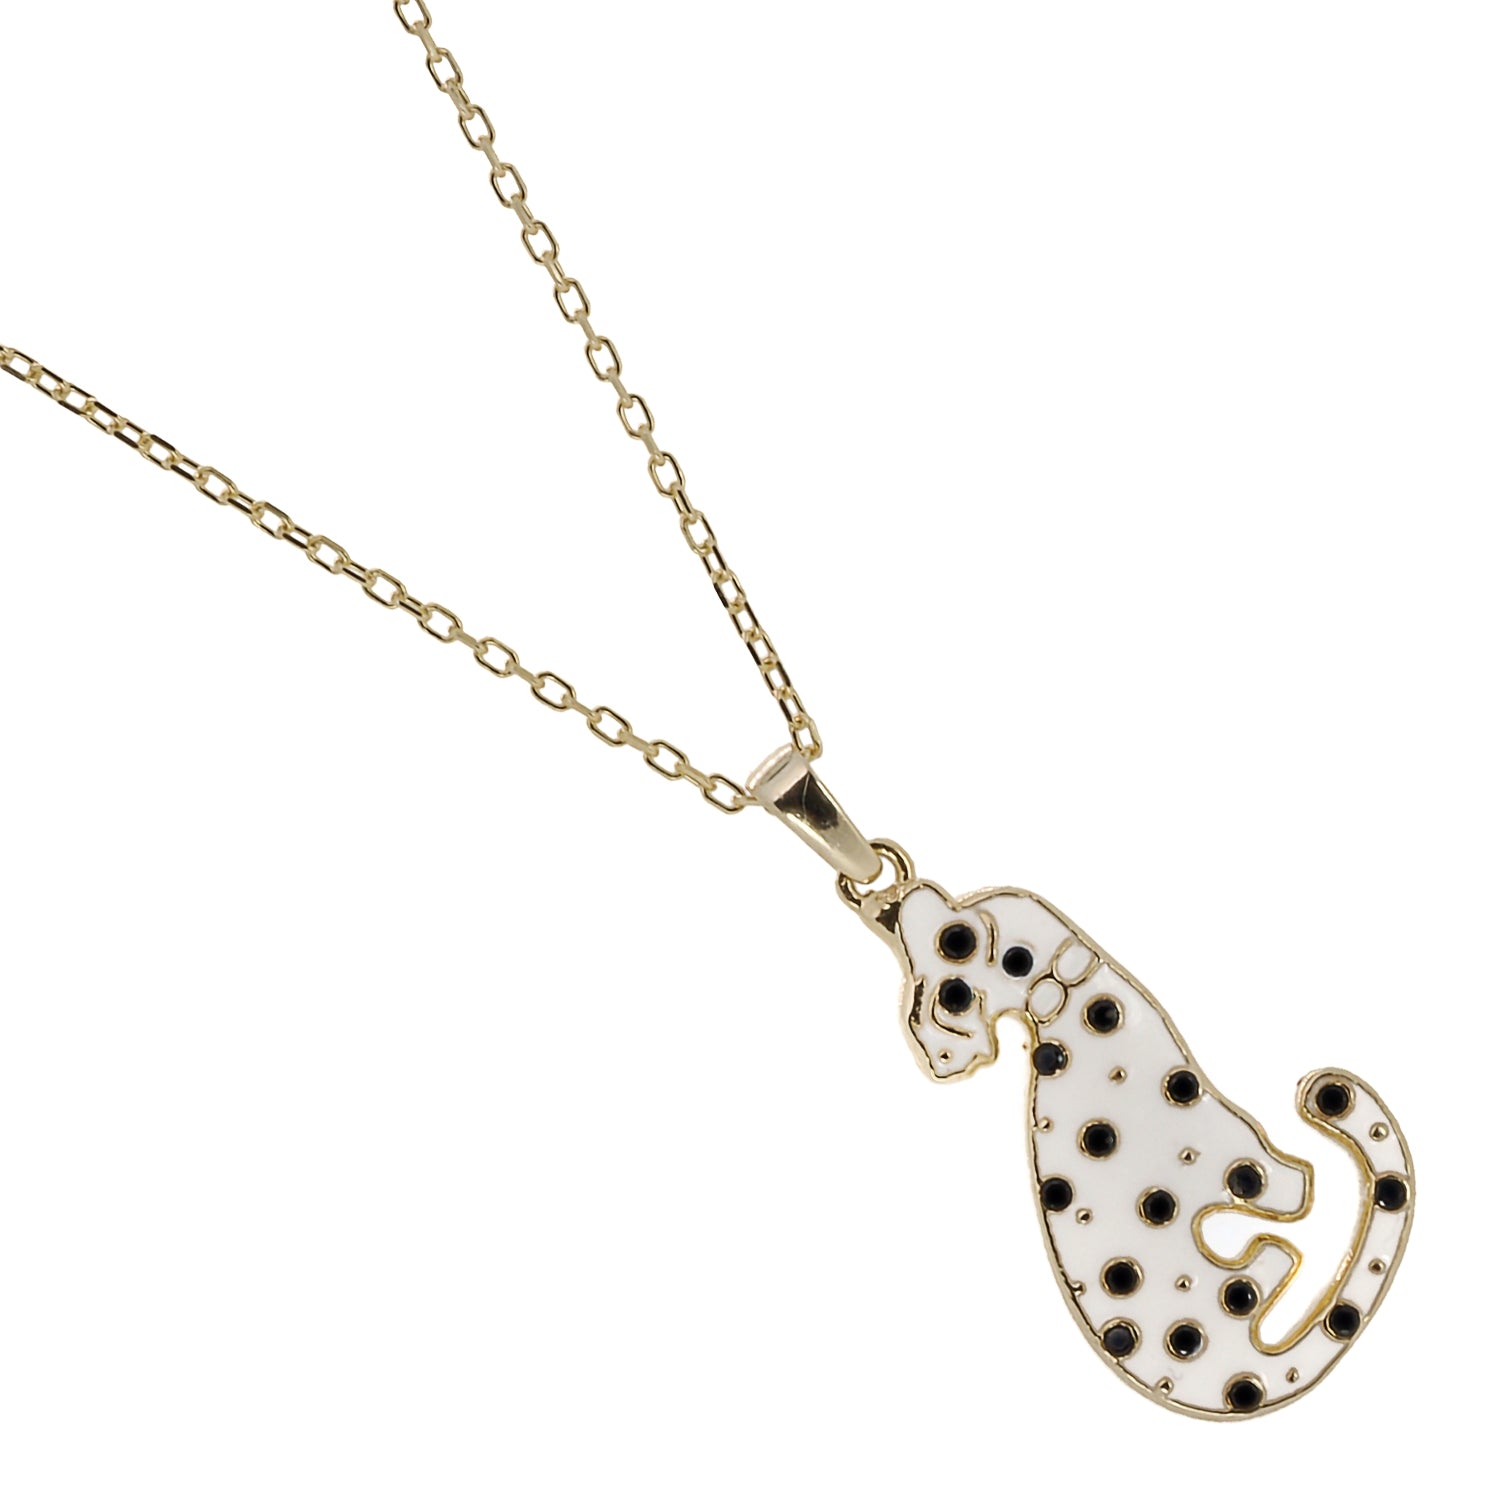 Gold Dalmatian Necklace, a meaningful piece of jewelry handcrafted with love and care.